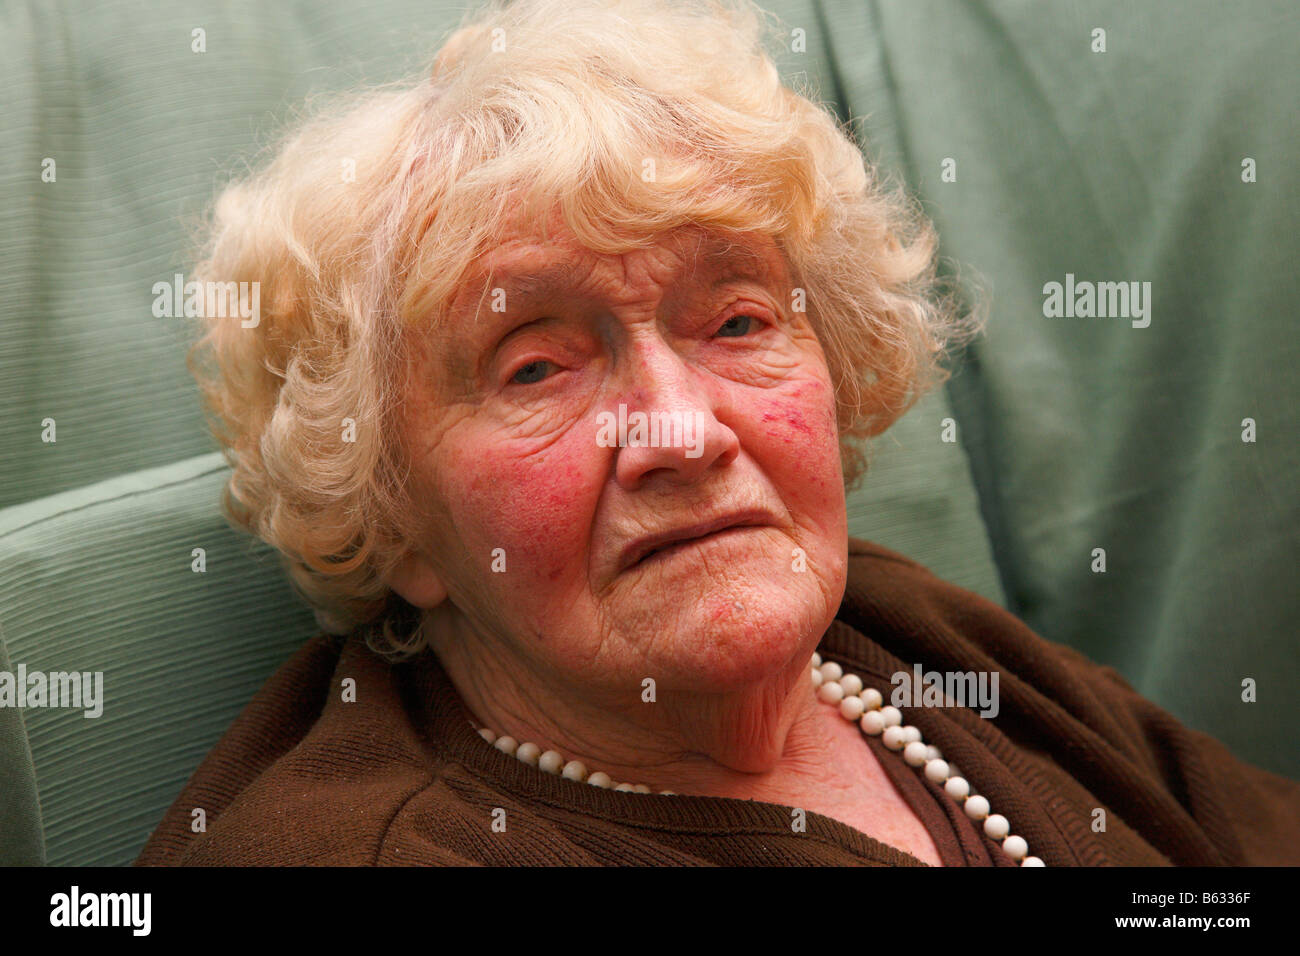 Old woman sitting in a chair Stock Photo